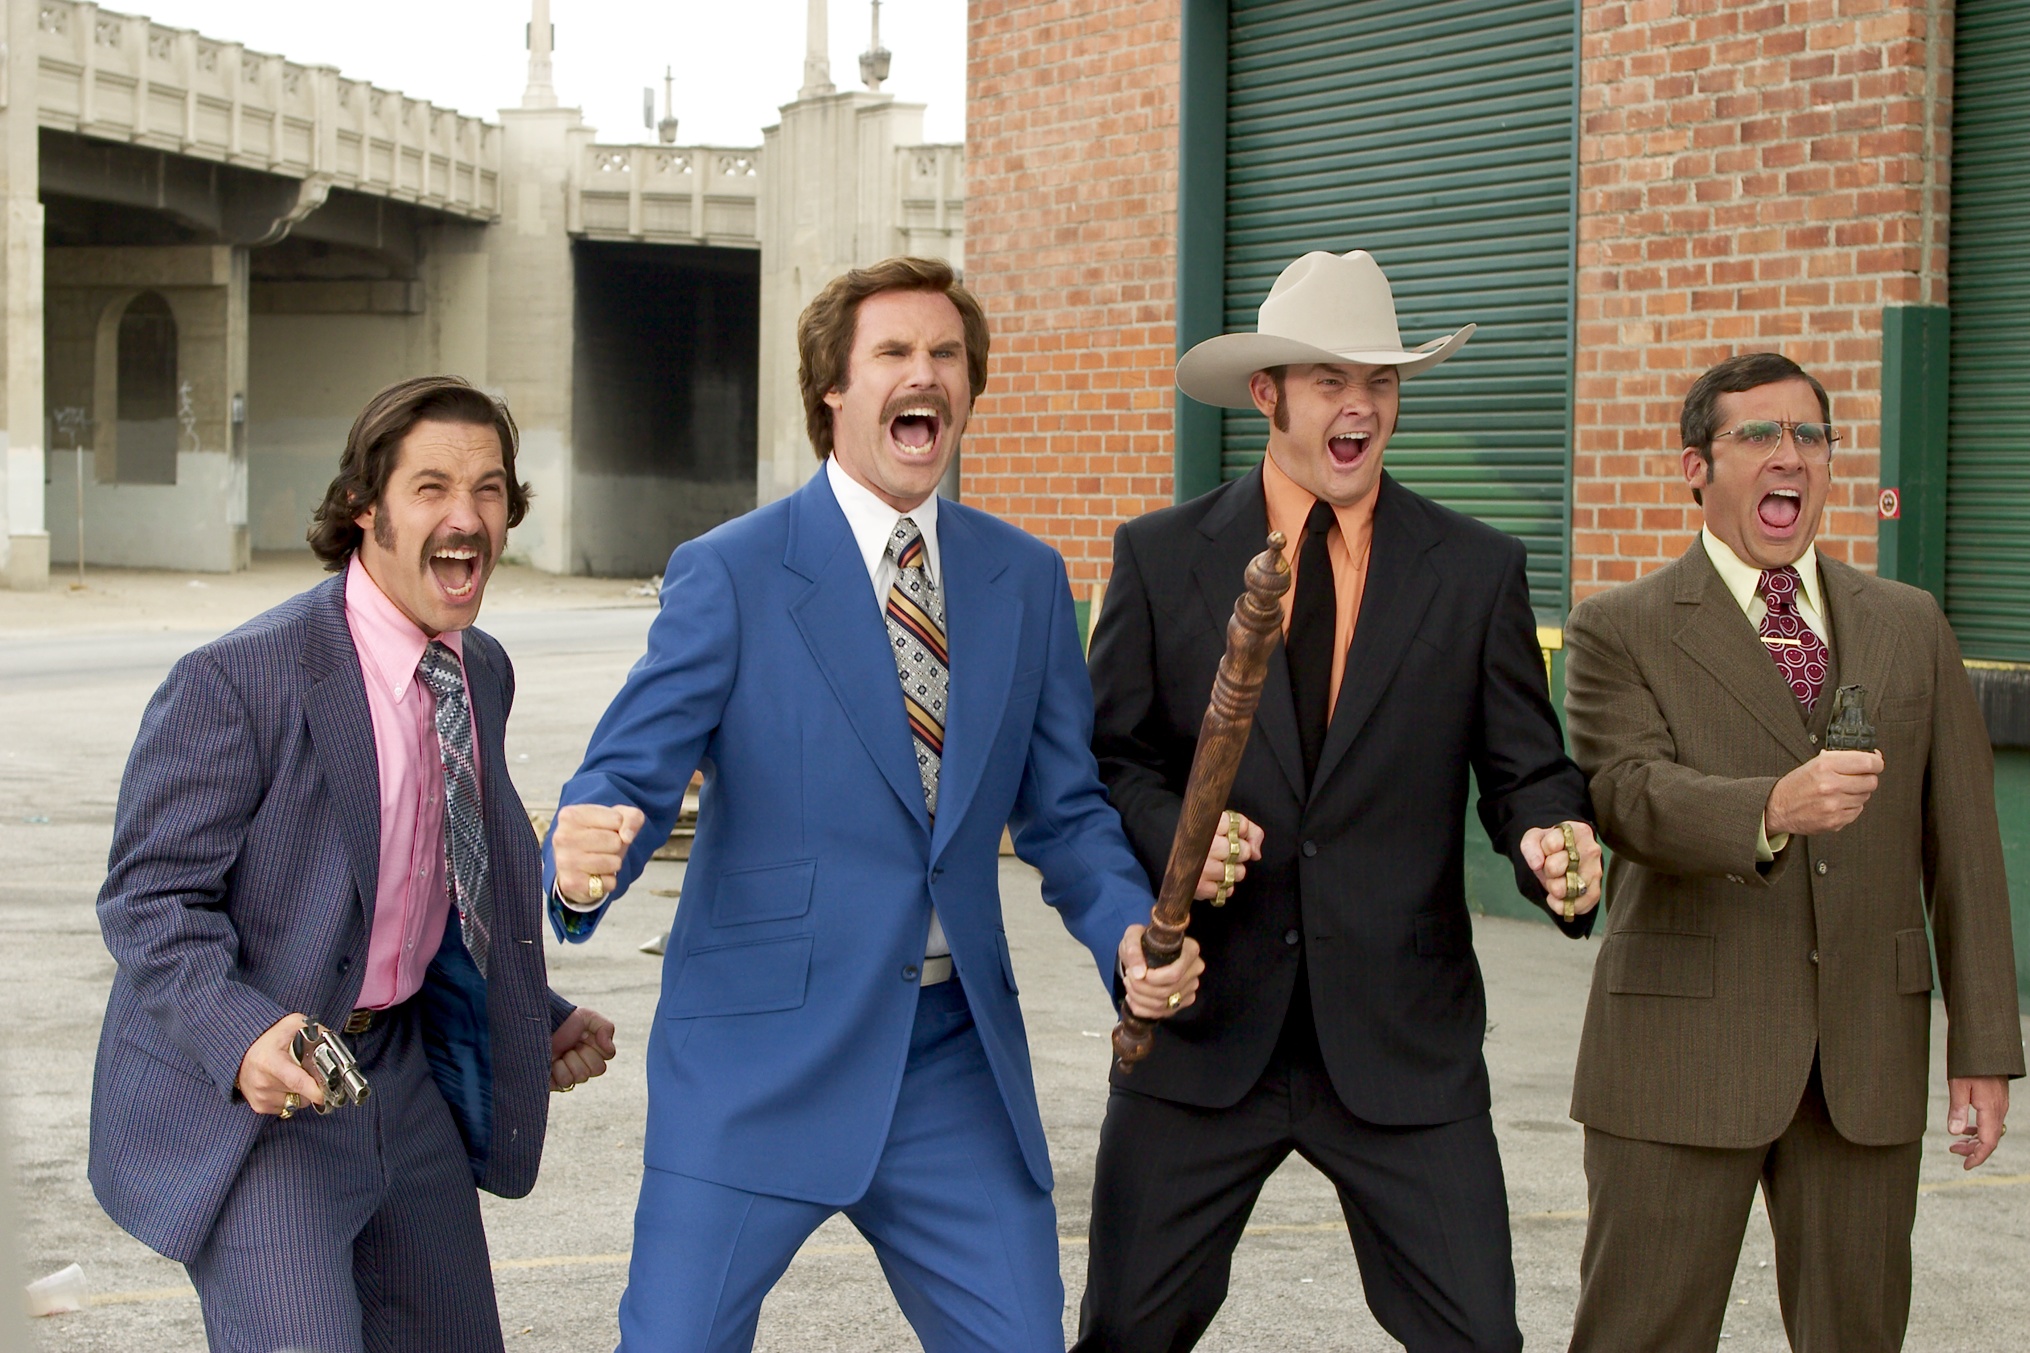 The Science is in: Anchorman is the greatest comedy of all time